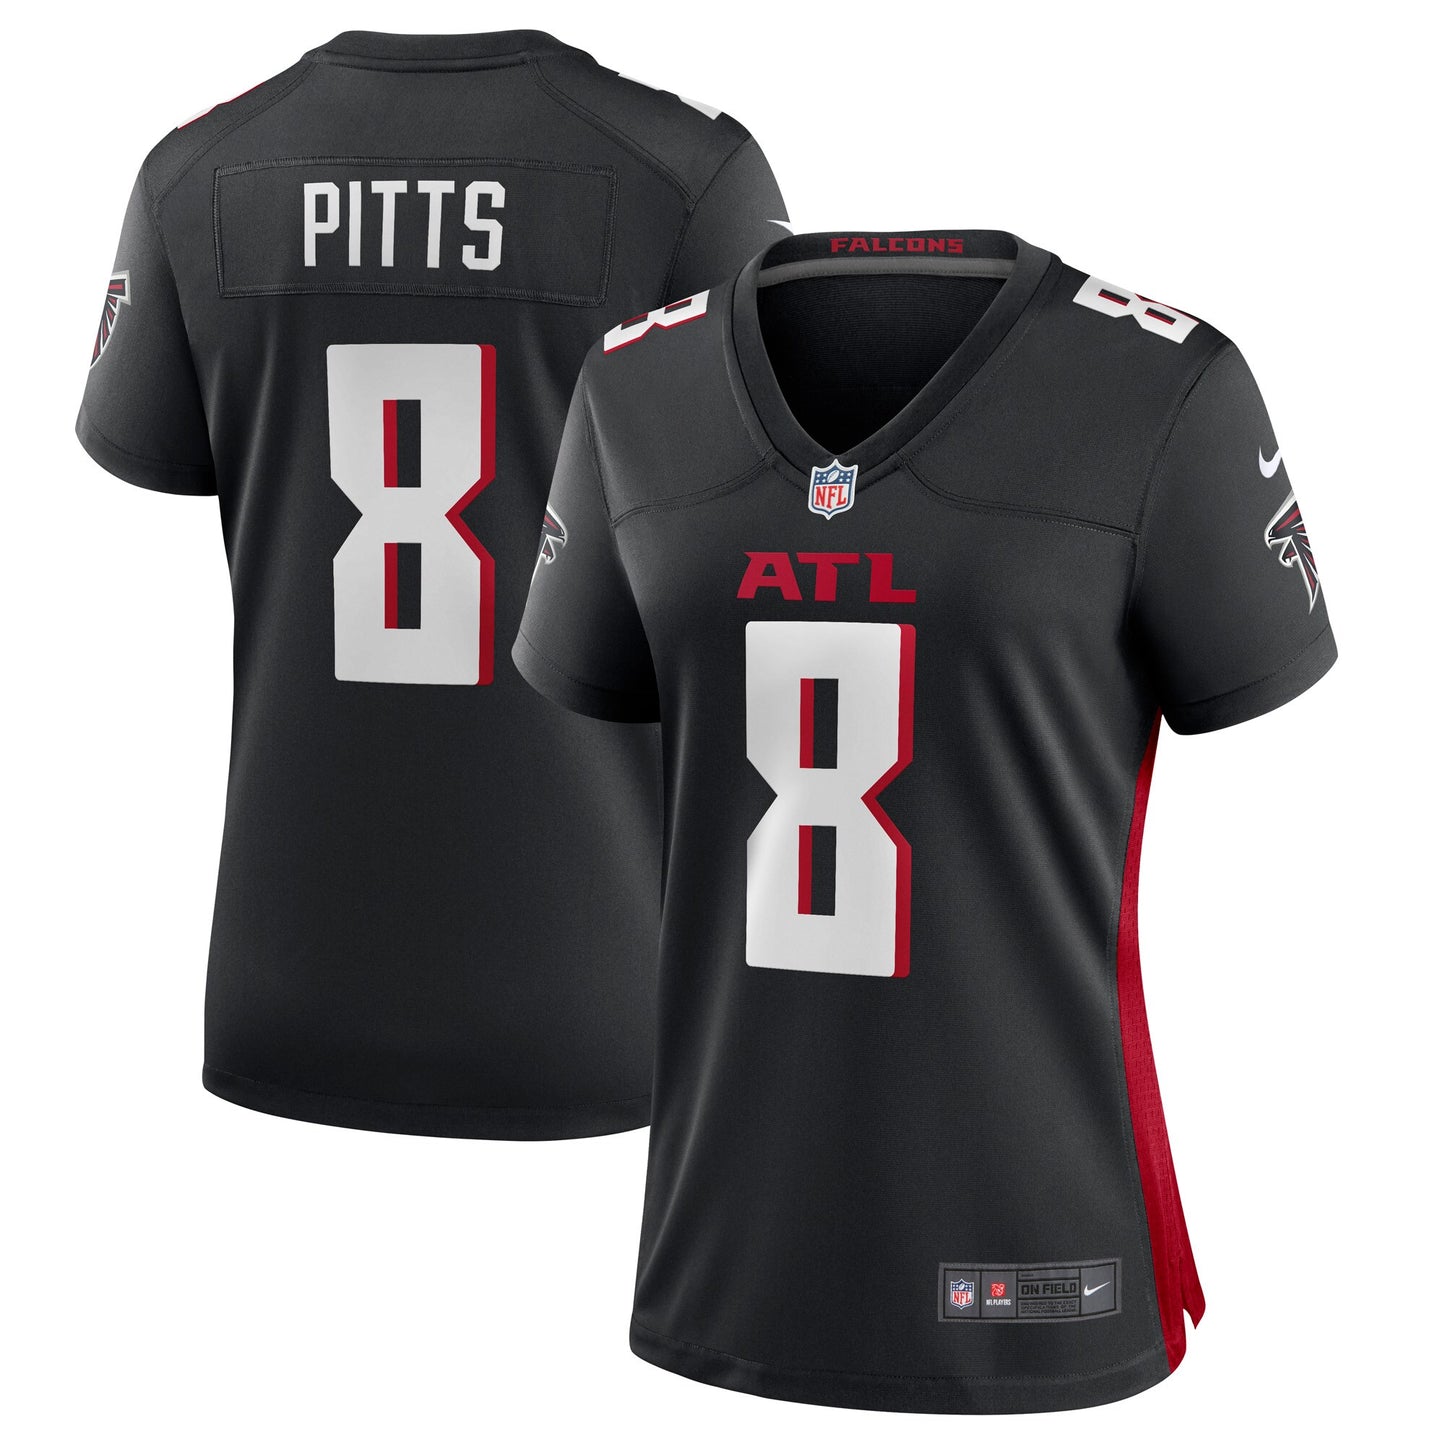 Kyle Pitts Atlanta Falcons Nike Women's 2021 NFL Draft First Round Pick Player Game Jersey - Black